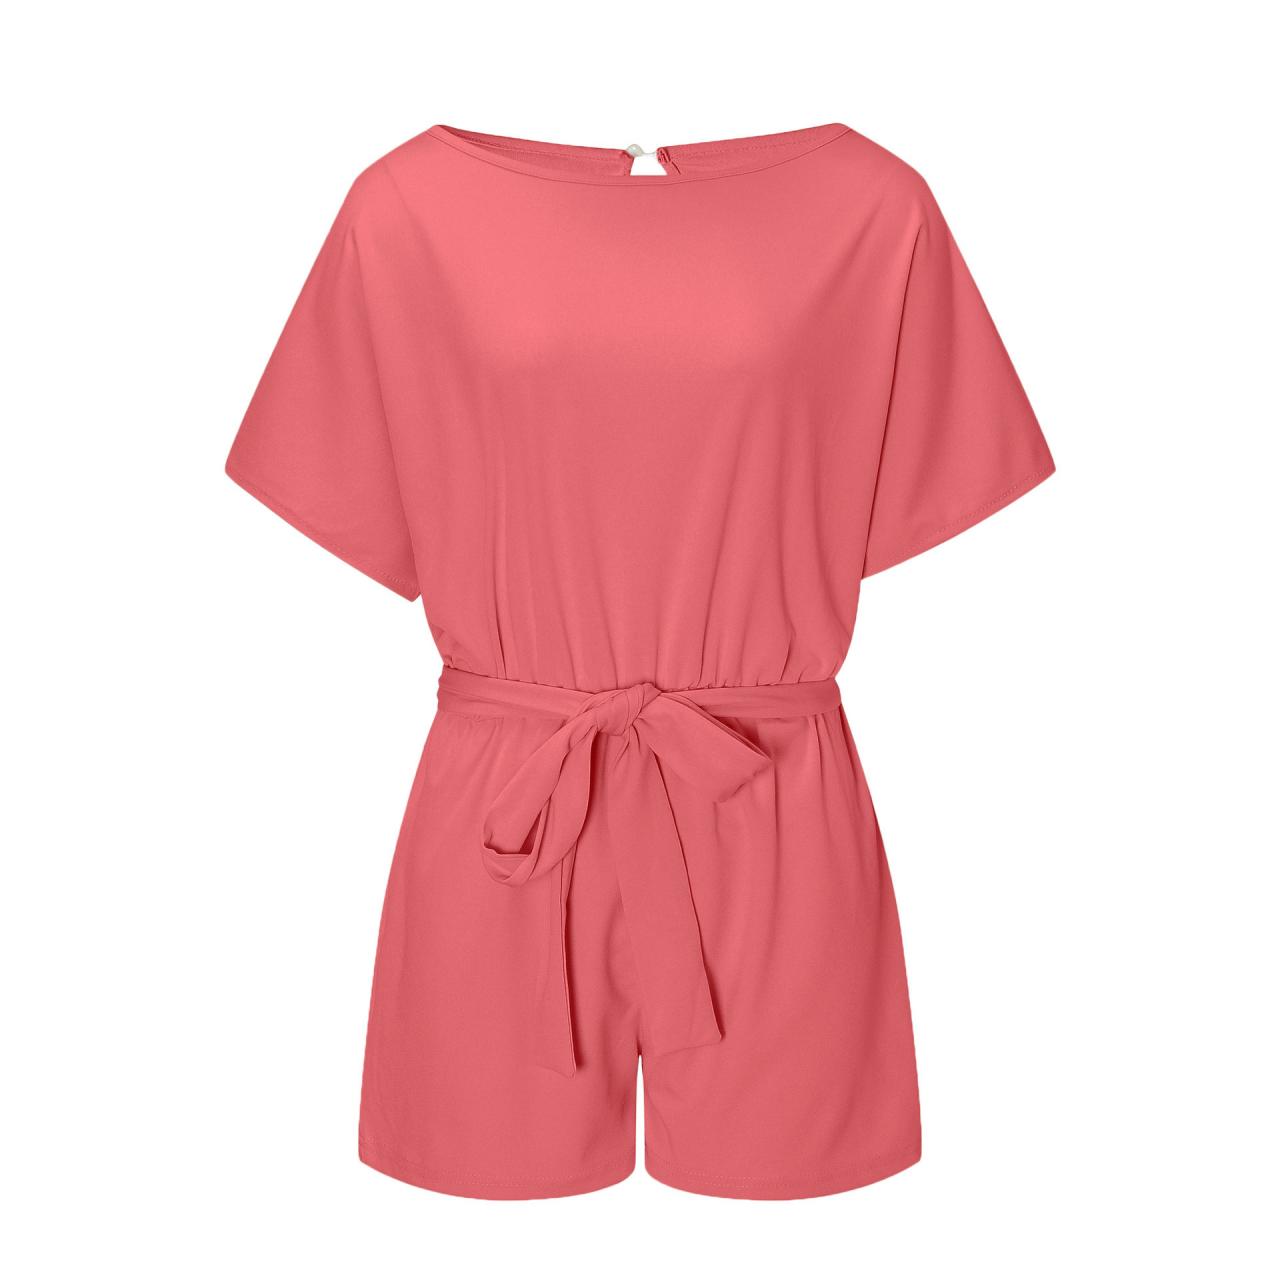 Women Jumpsuit Summer Short Sleeve Belted Casual Shorts Rompers ...